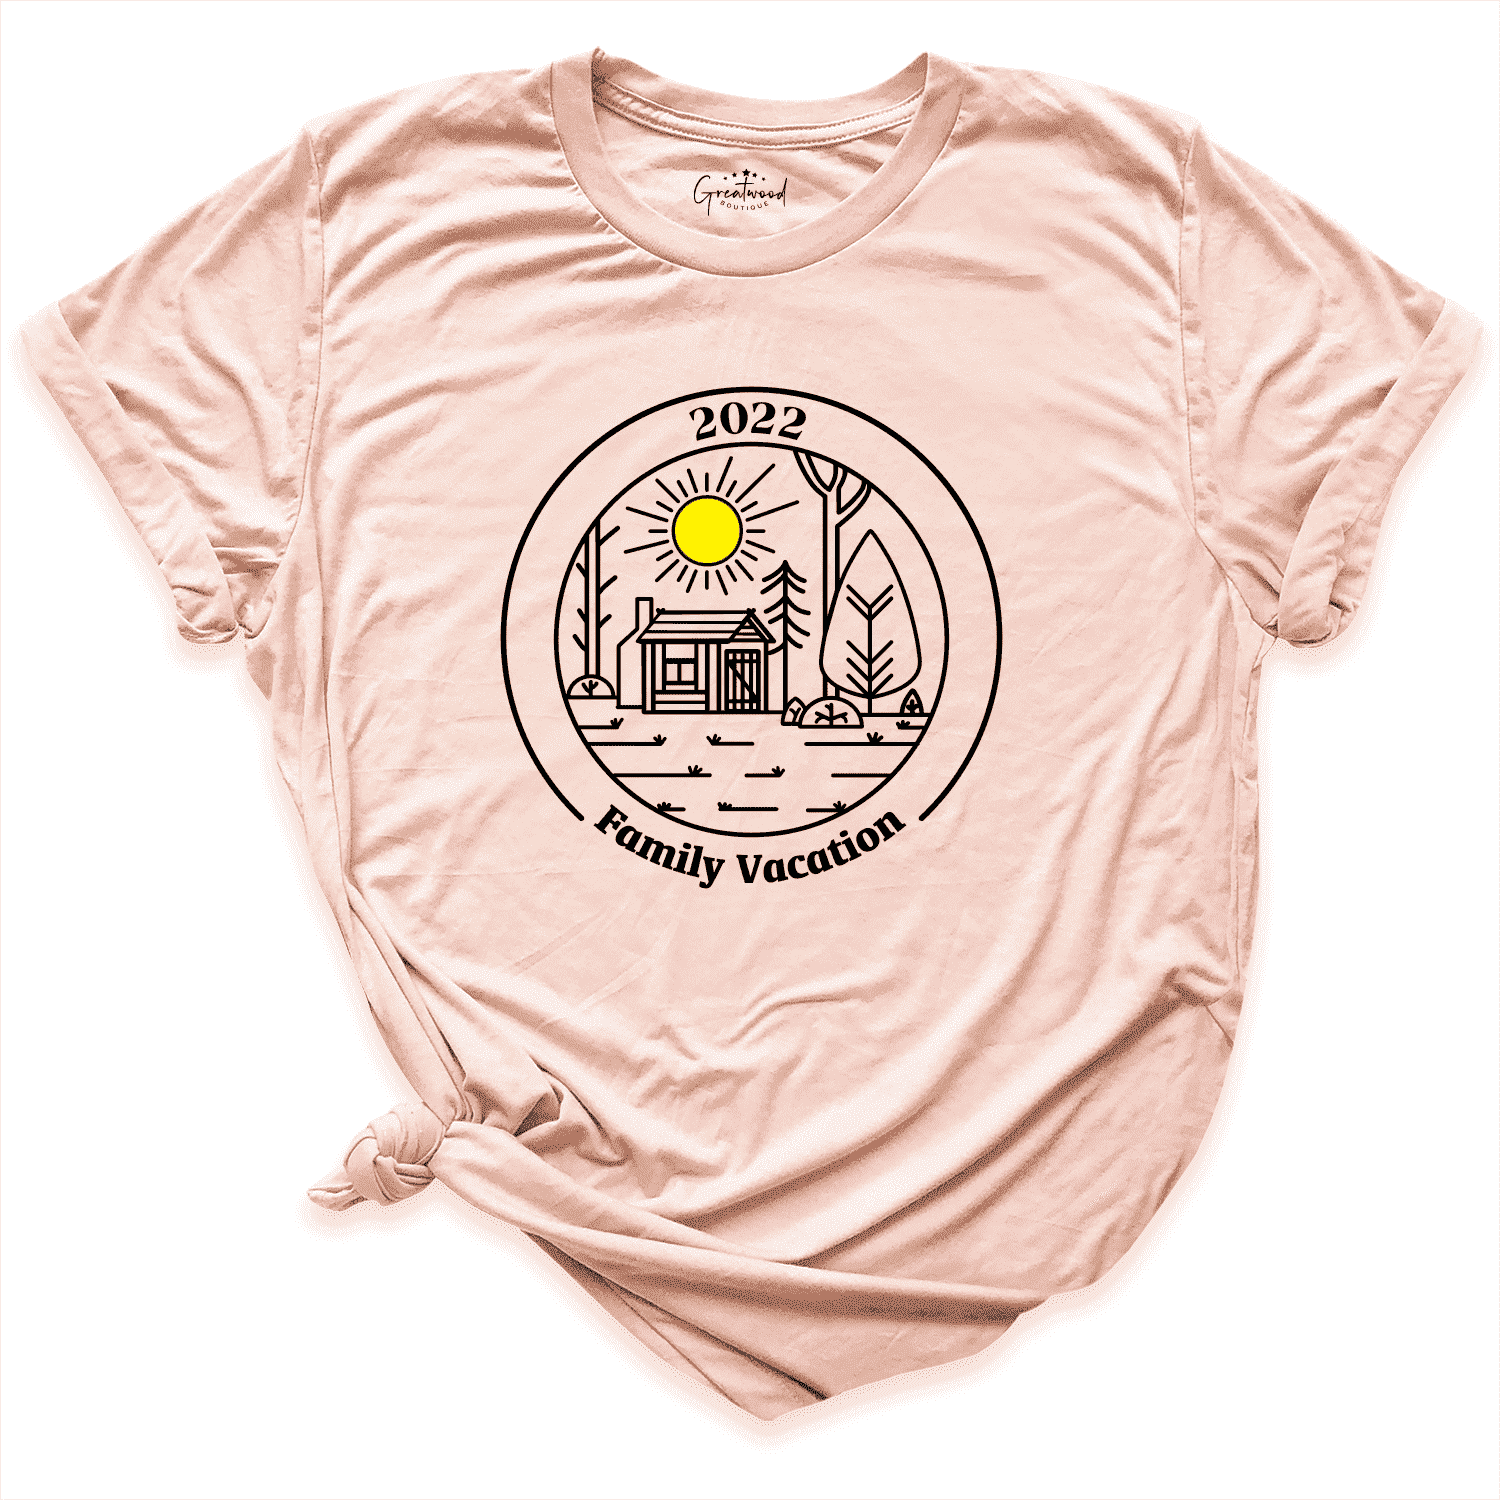 Family Vacation 2022 Shirt Peach - Greatwood Boutique